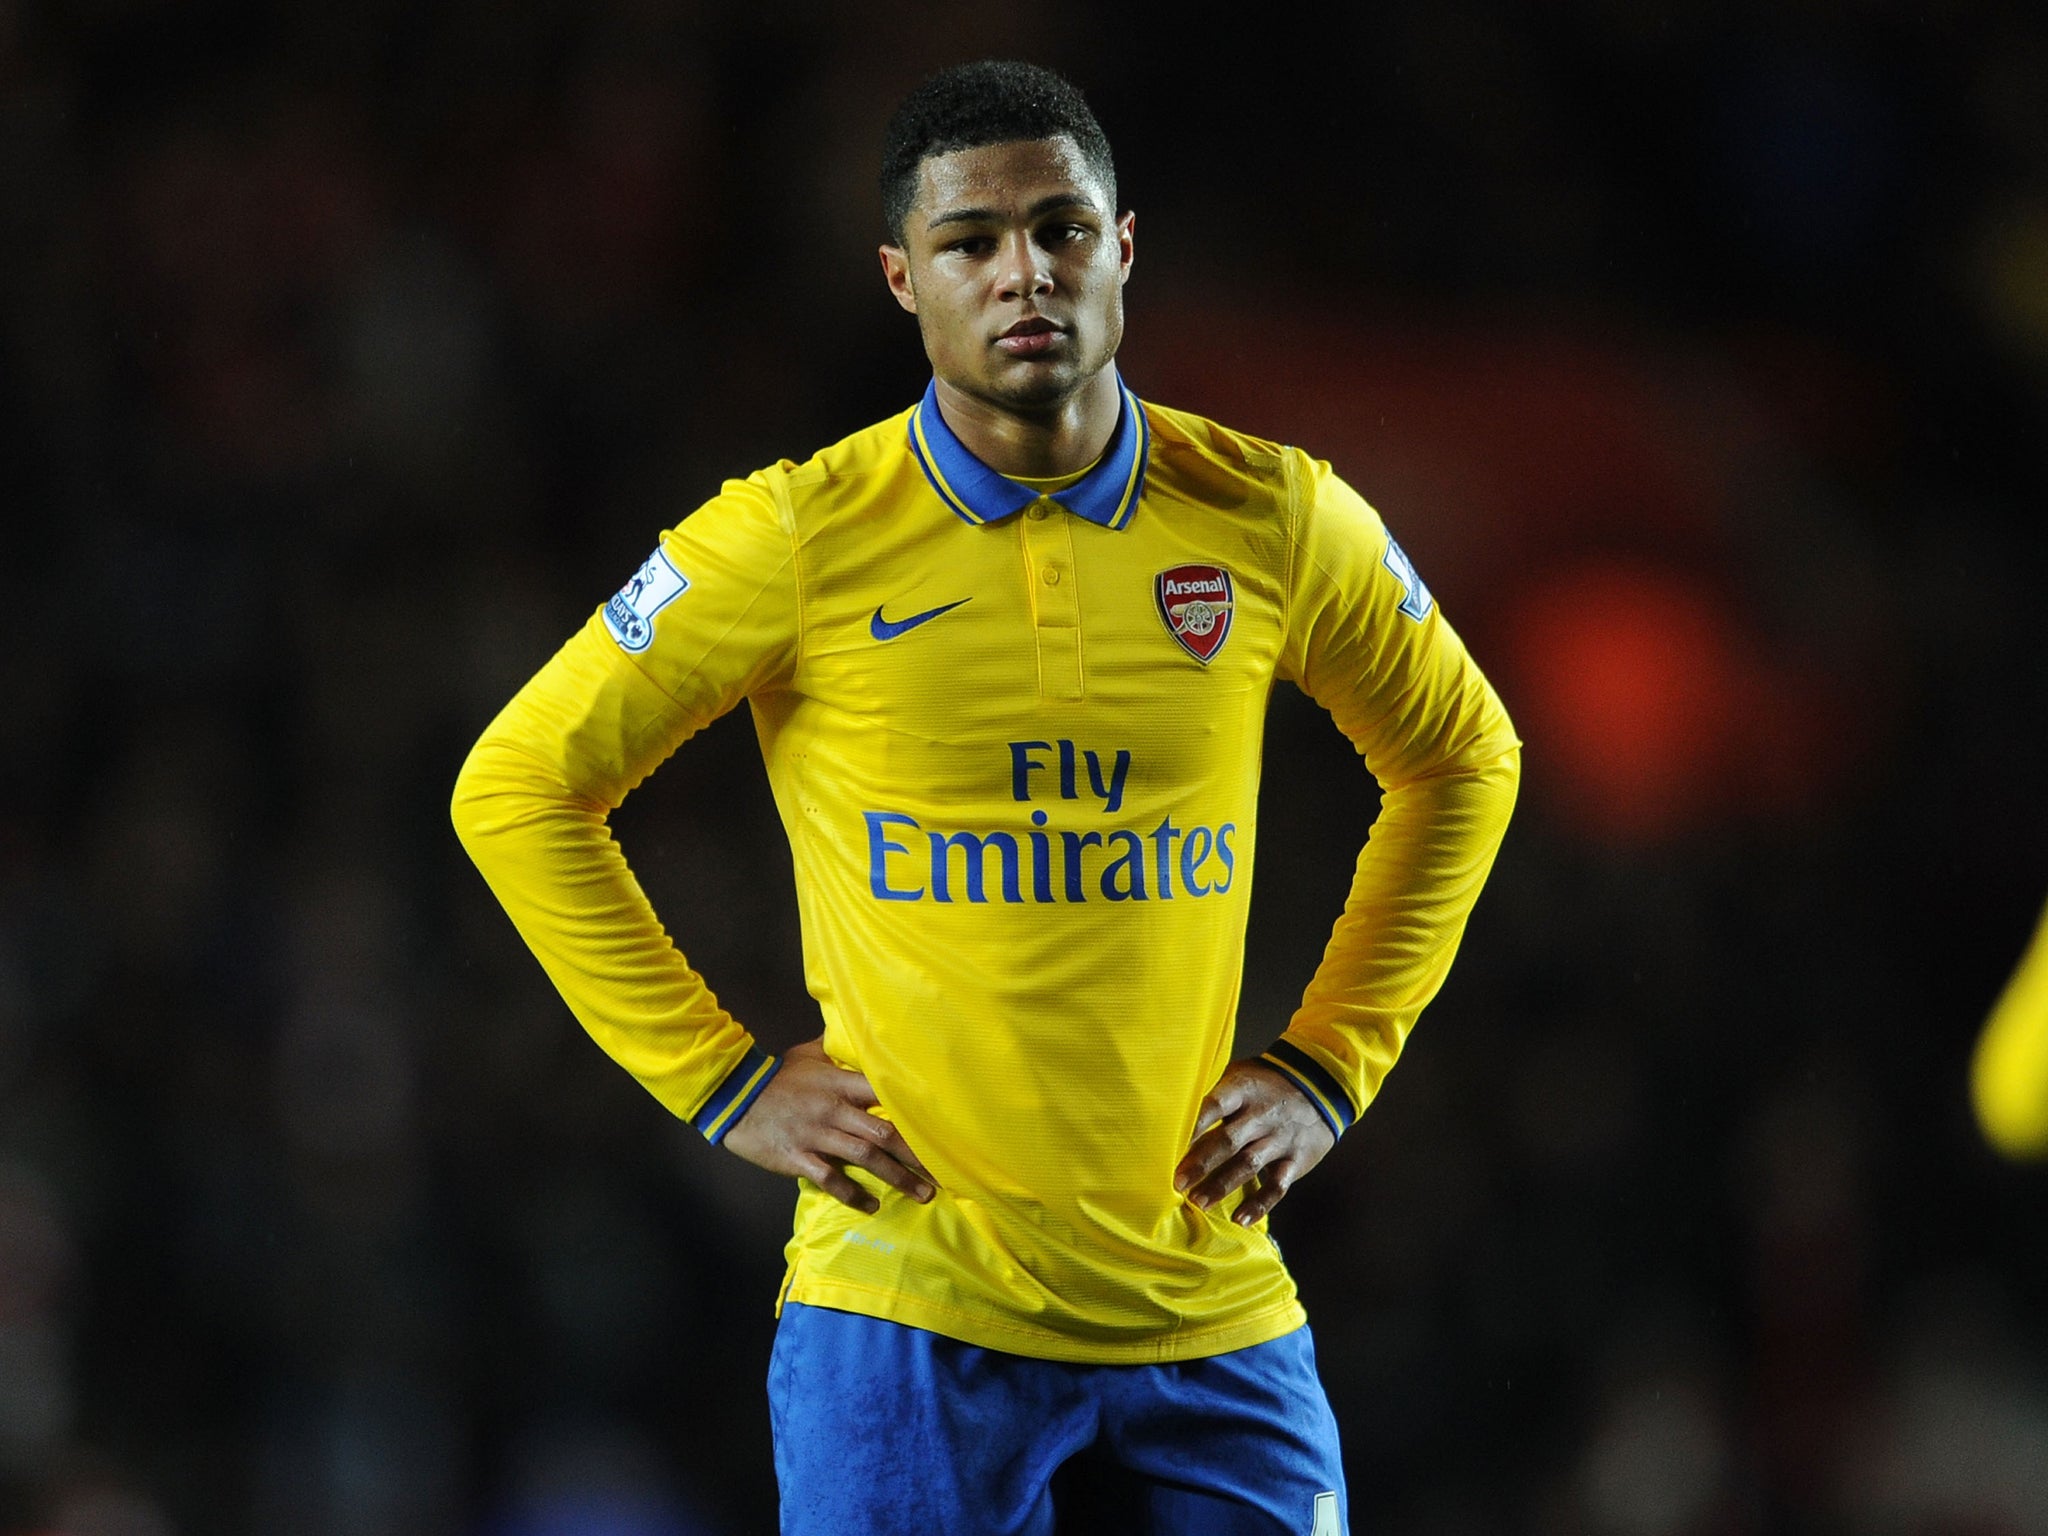 Serge Gnabry is hoping to take advantage of any first-team chances that come his way